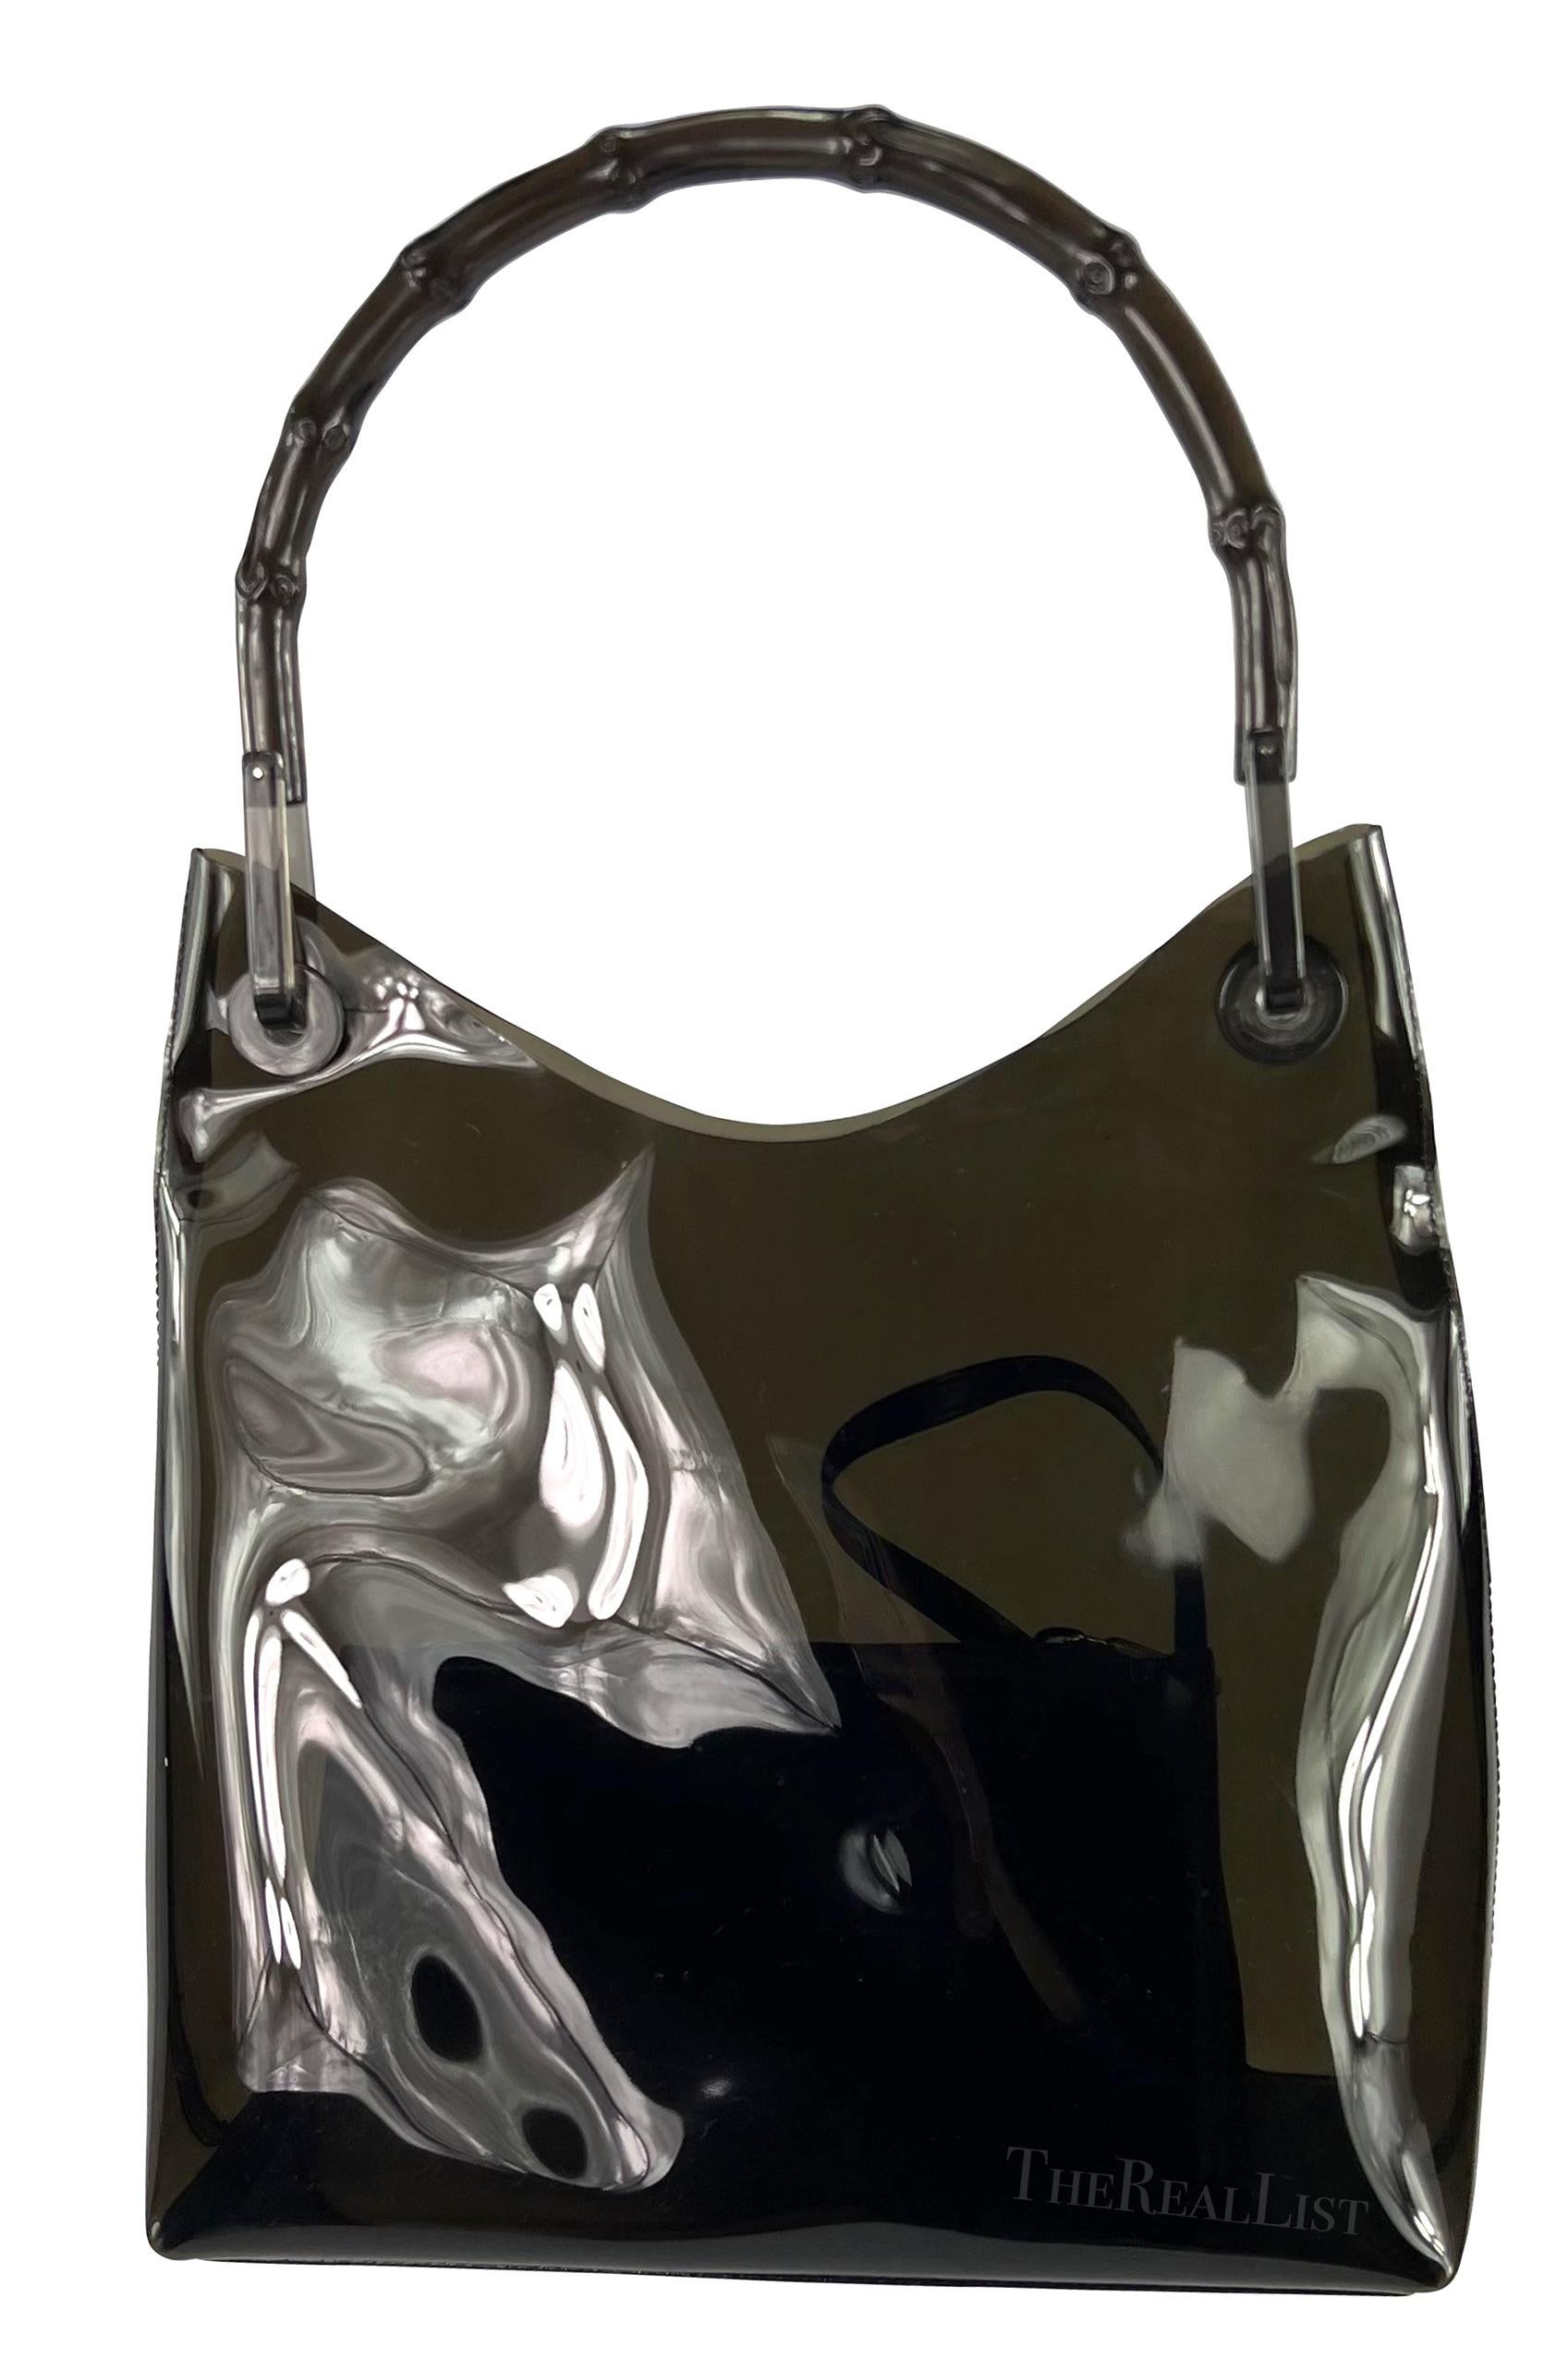 Presenting a fabulous black transparent PVC Gucci tote, designed by Tom Ford. From the late 1990s, this bag showcases a mesmerizing semi-transparent black PVC composition. The inclusion of a PVC bamboo handle not only infuses the piece with a touch